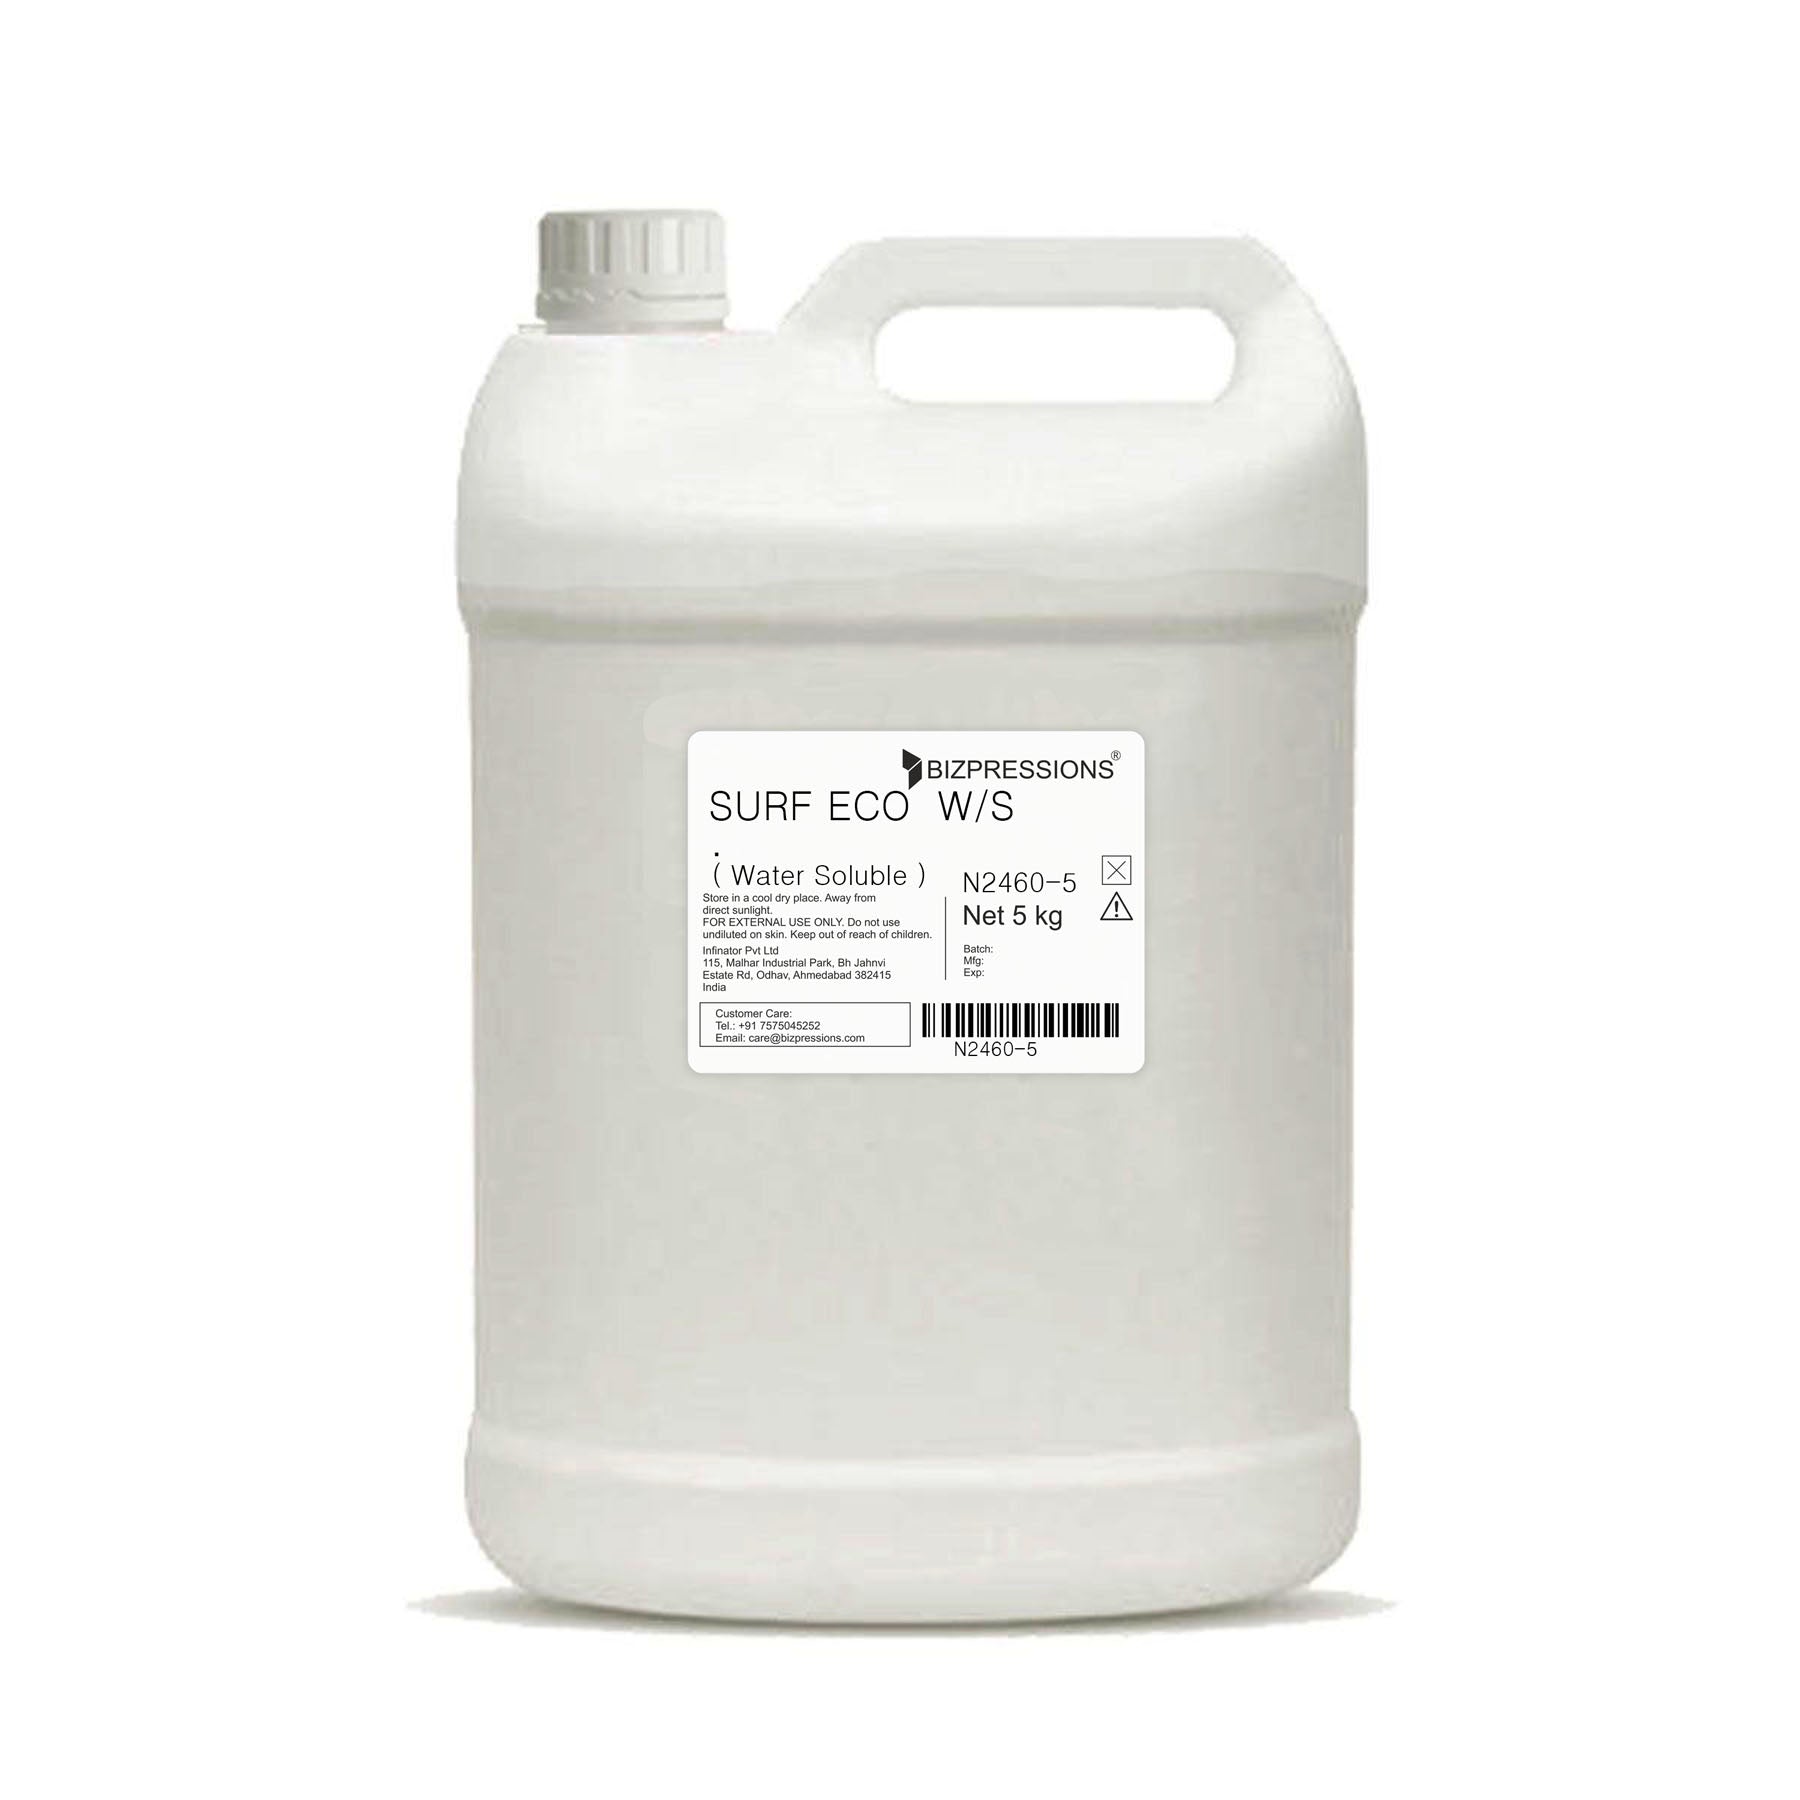 SURF ECO W/S - Fragrance ( Water Soluble ) - 5 kg